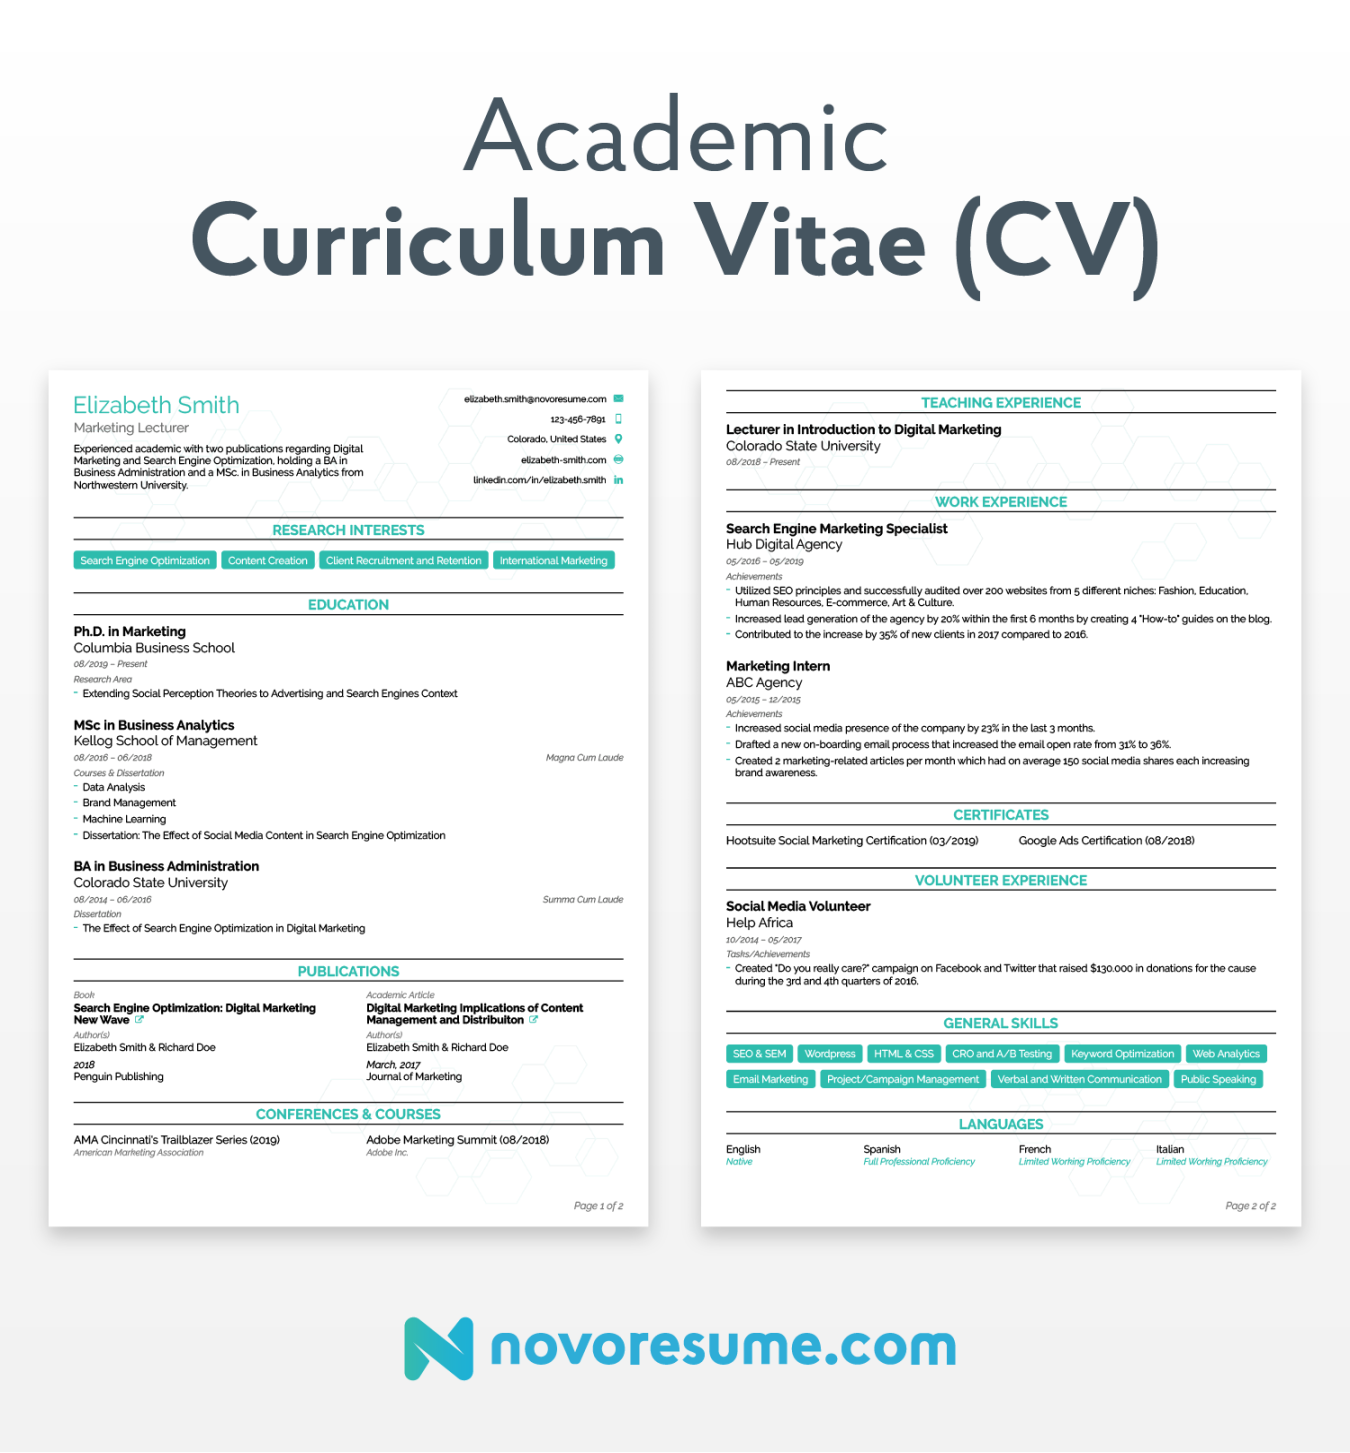 CV vs Resume - + Key Differences [w/ Examples]